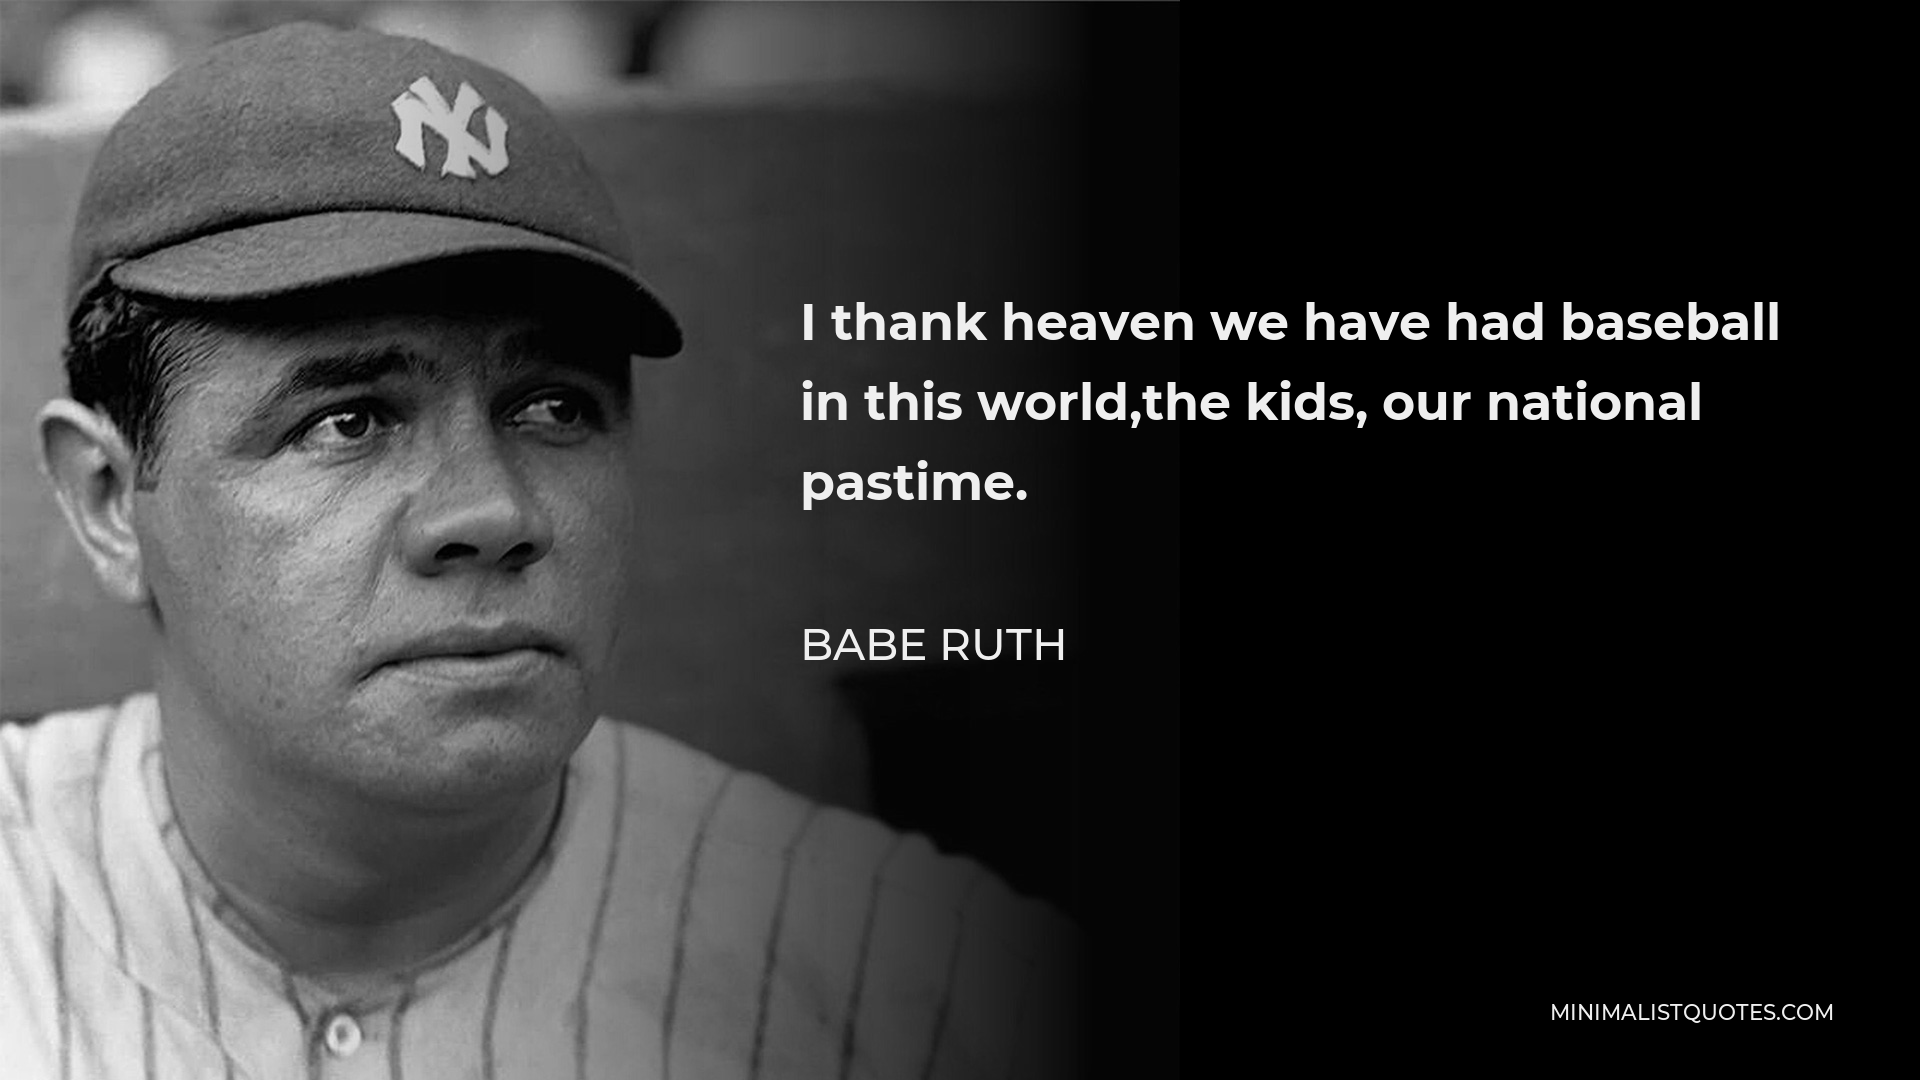 Babe Ruth Quote - I thank heaven we have had baseball in this world,the kids, our national pastime.